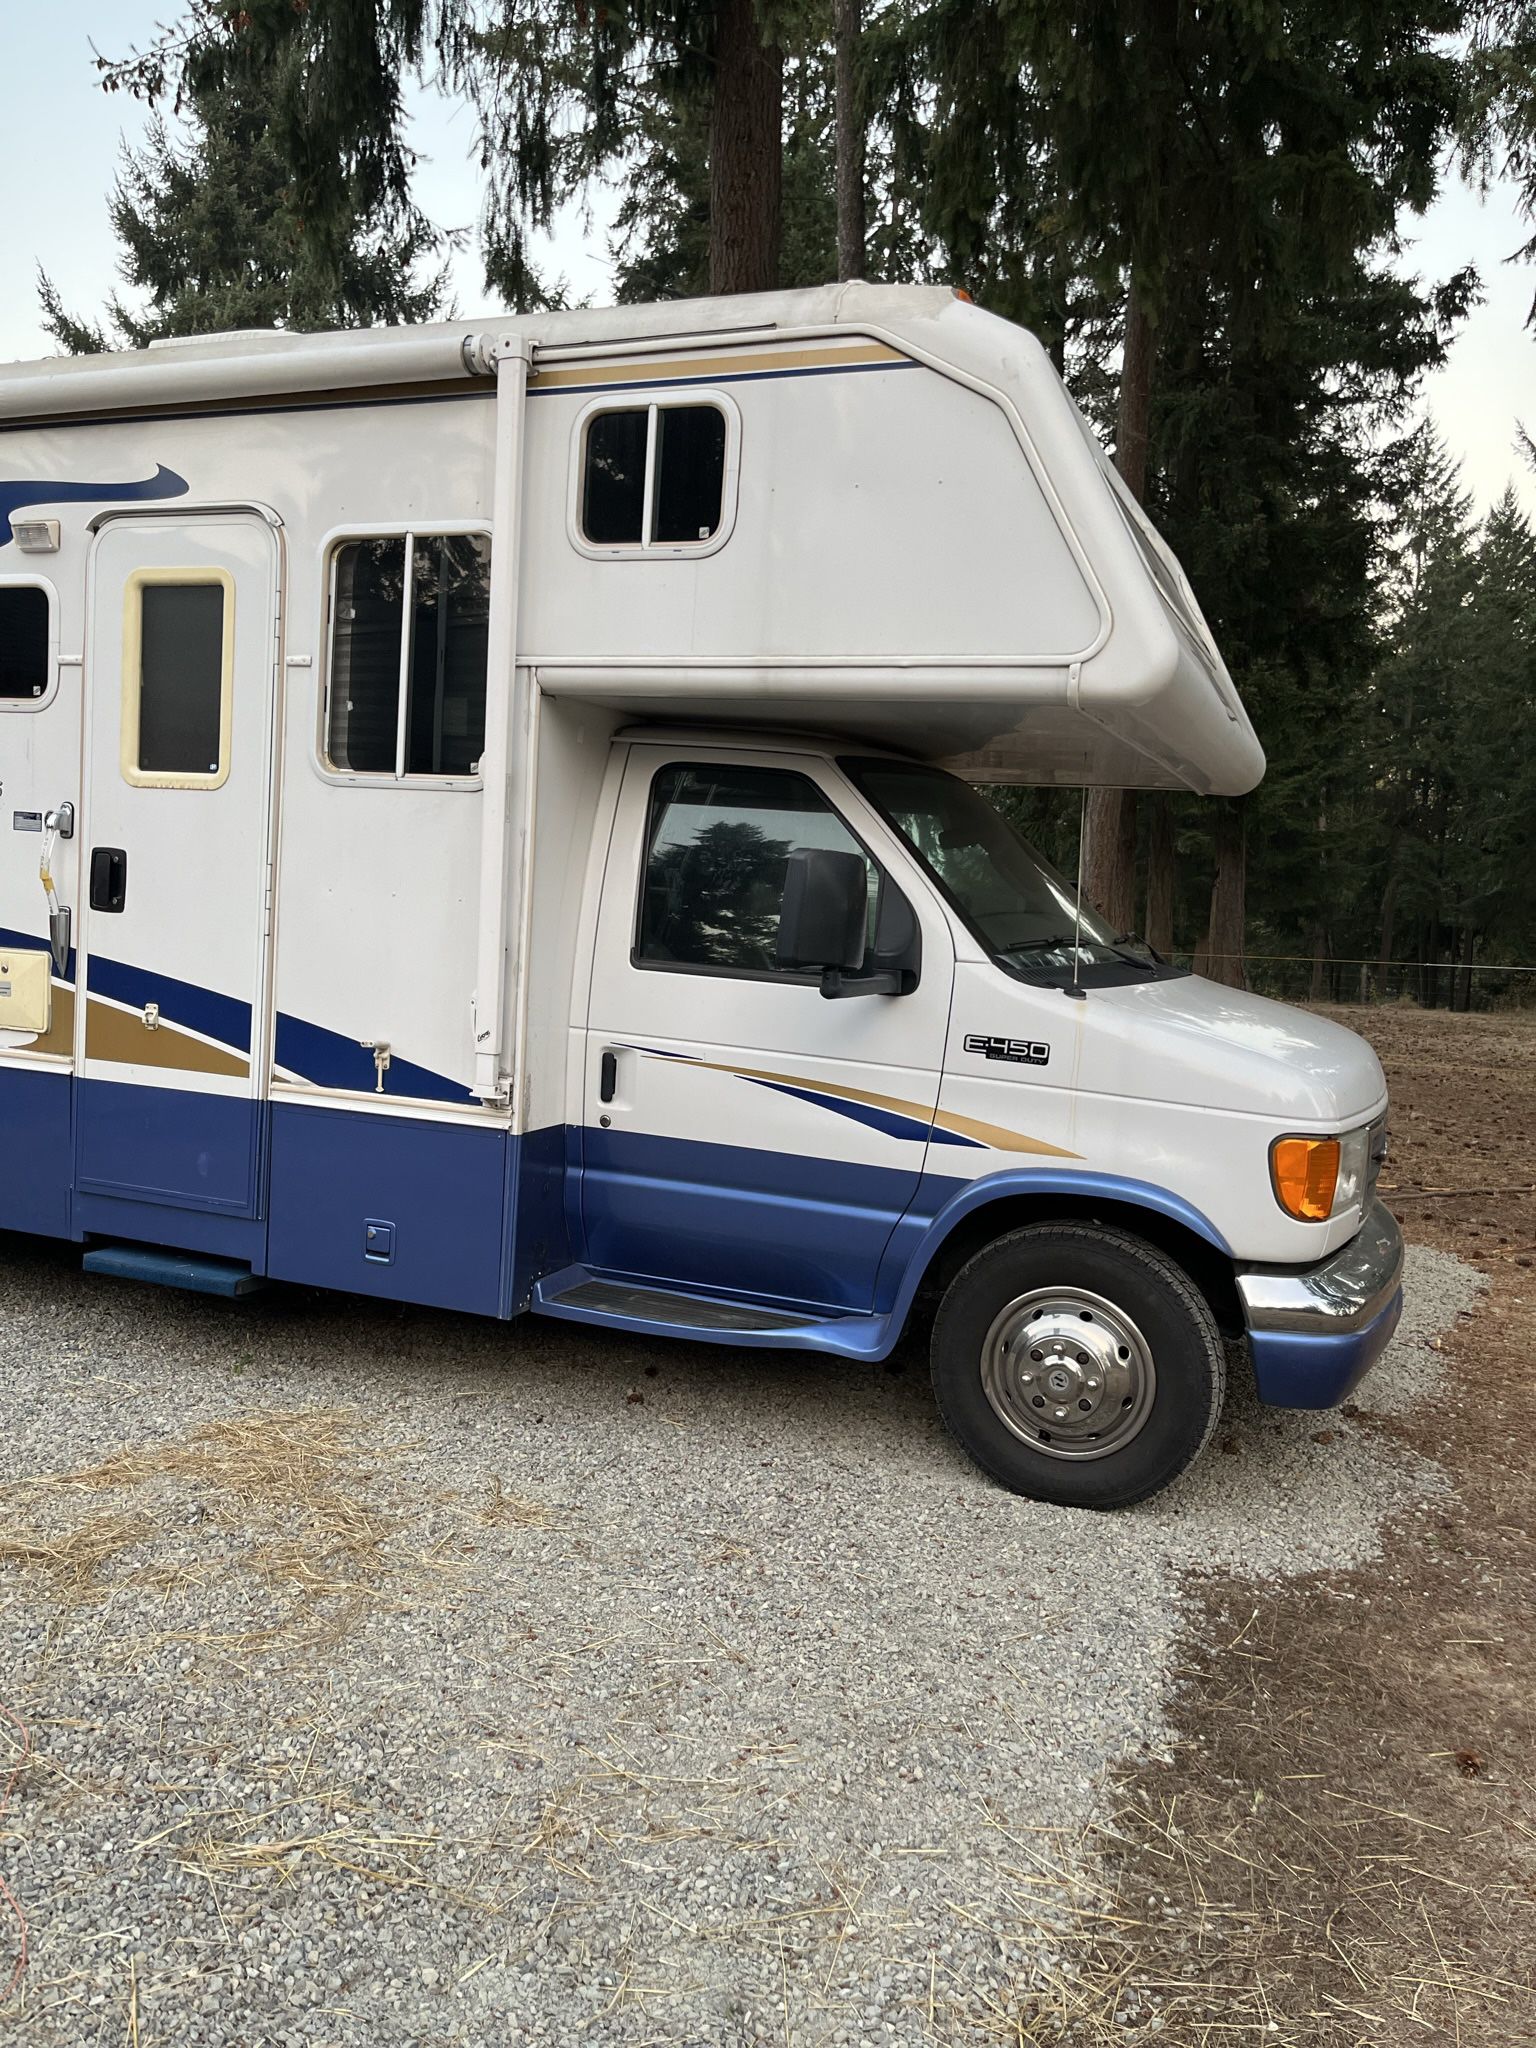 2004 Holiday Rambler Atlantis For Sale In Roy Wa Offerup